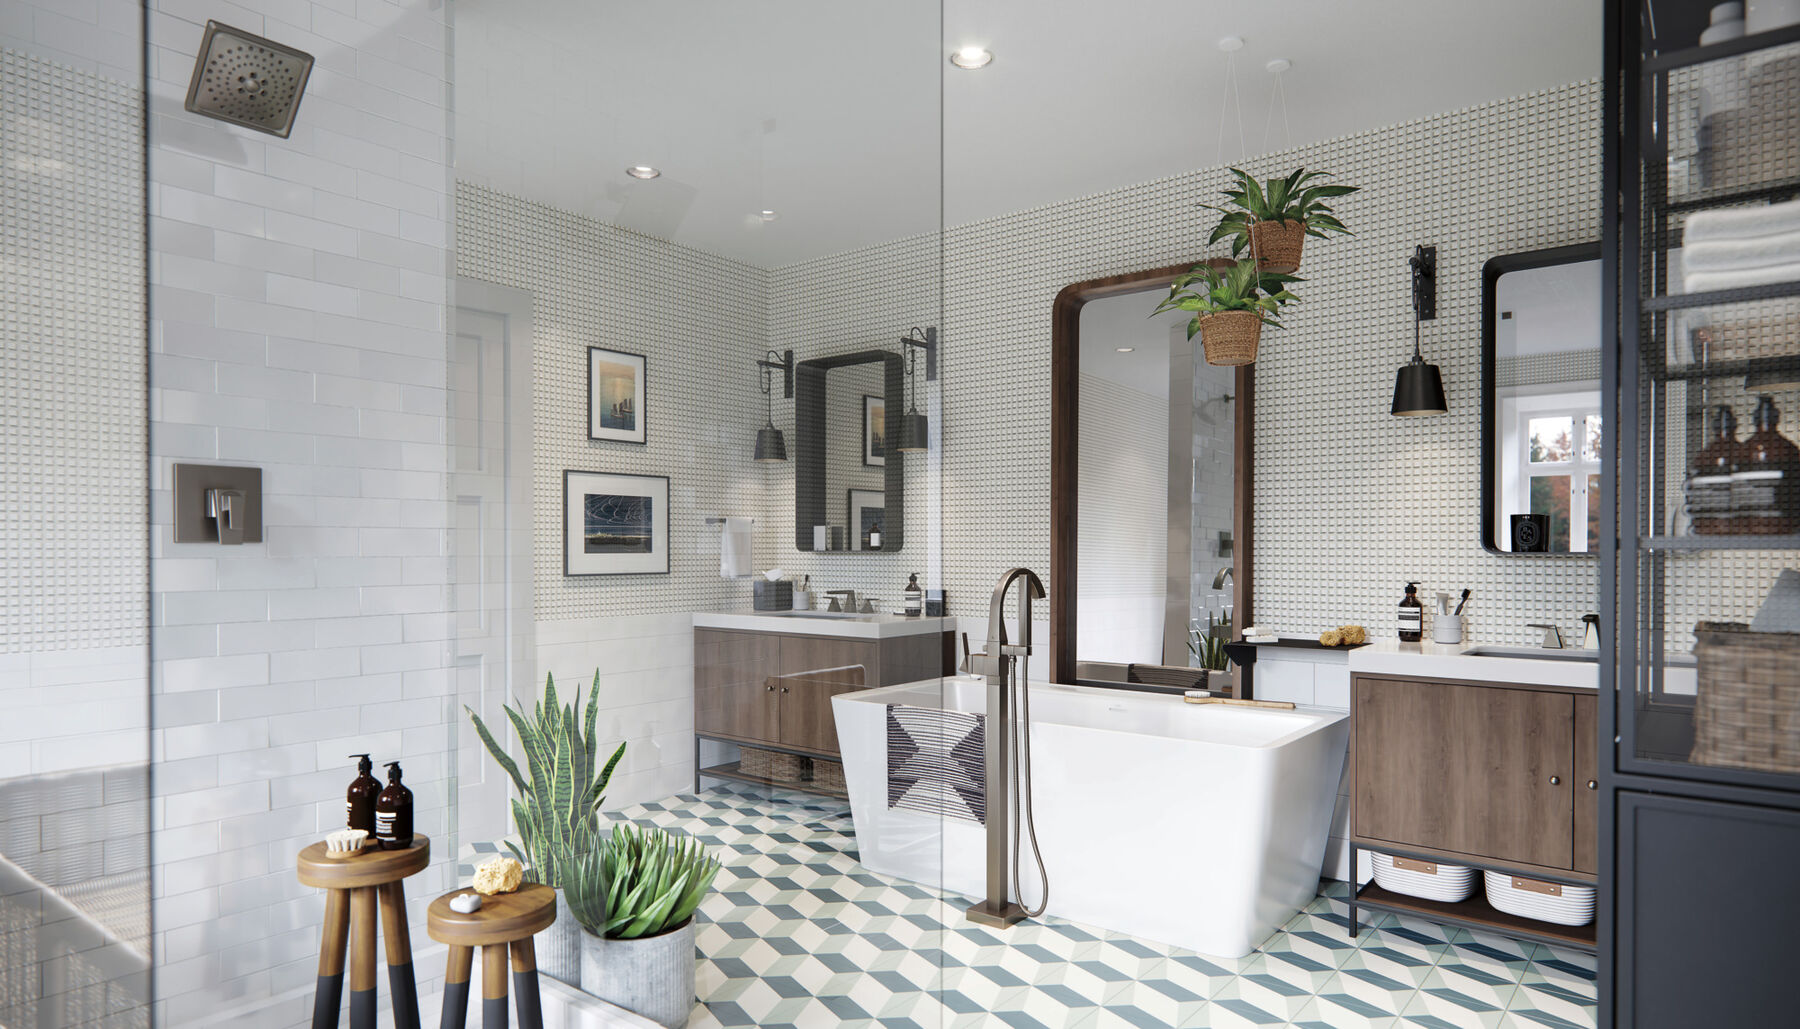 17 Ways to Decorate With Black in the Bathroom